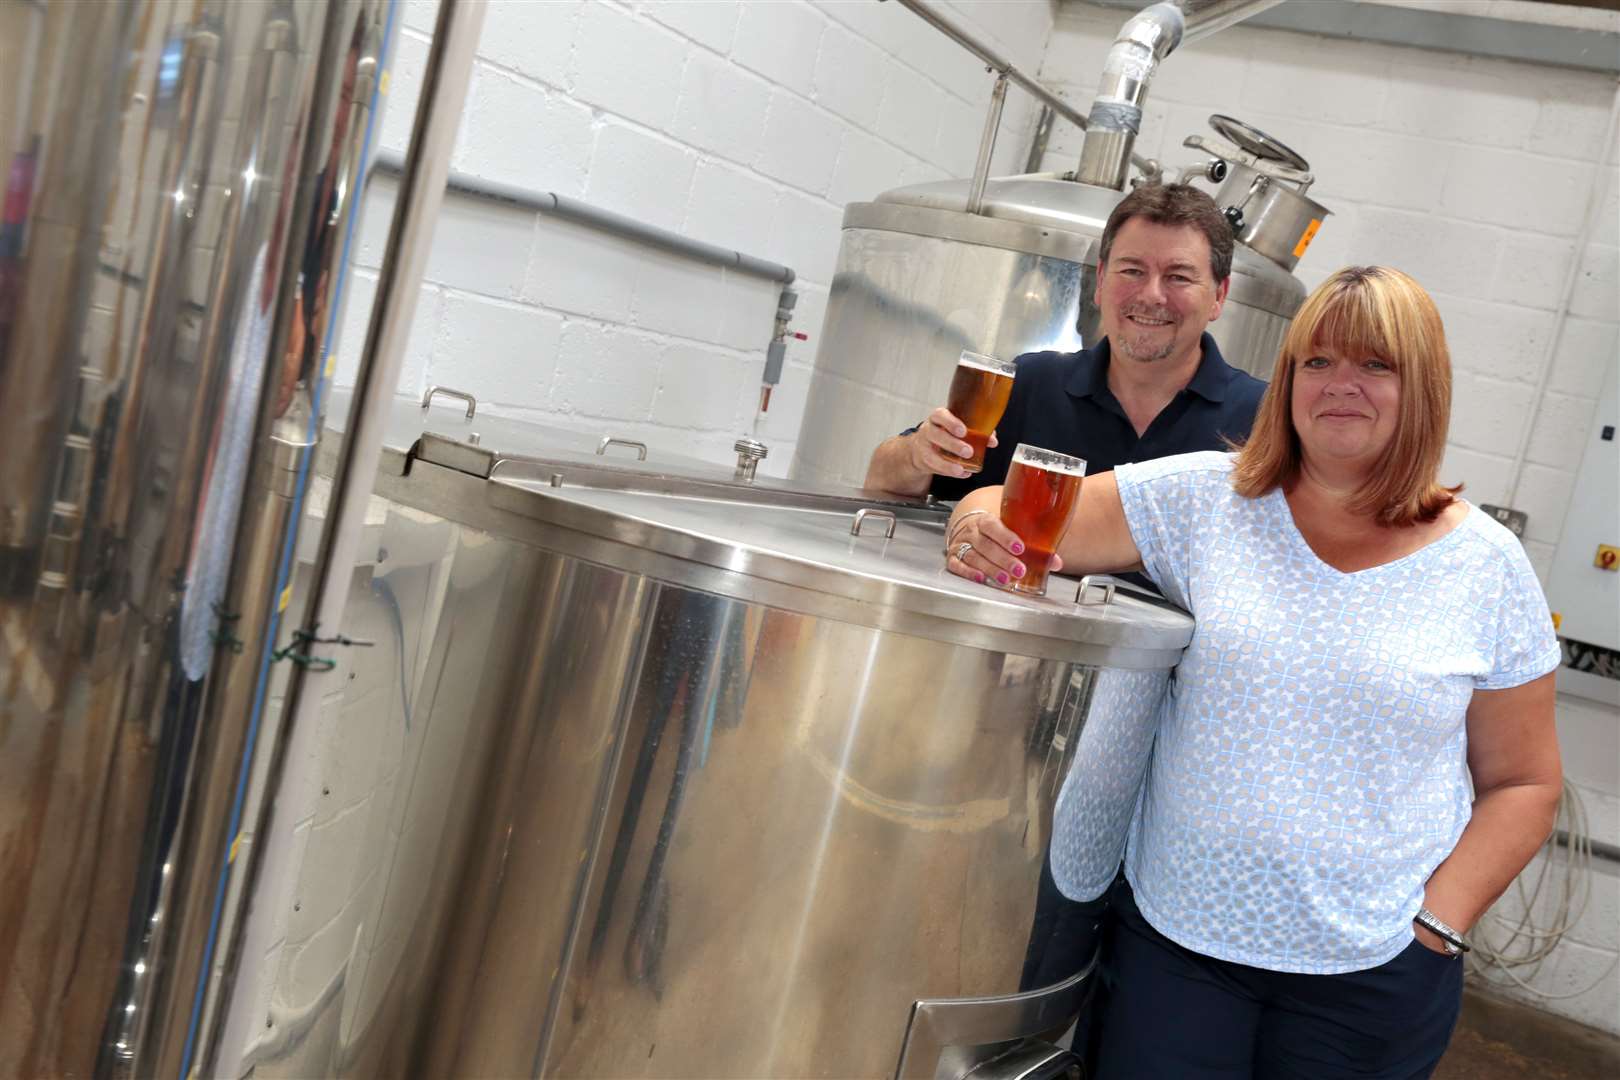 Steve and Jacqui Hefft opened 12 Bar Brewing Company in Marden in June